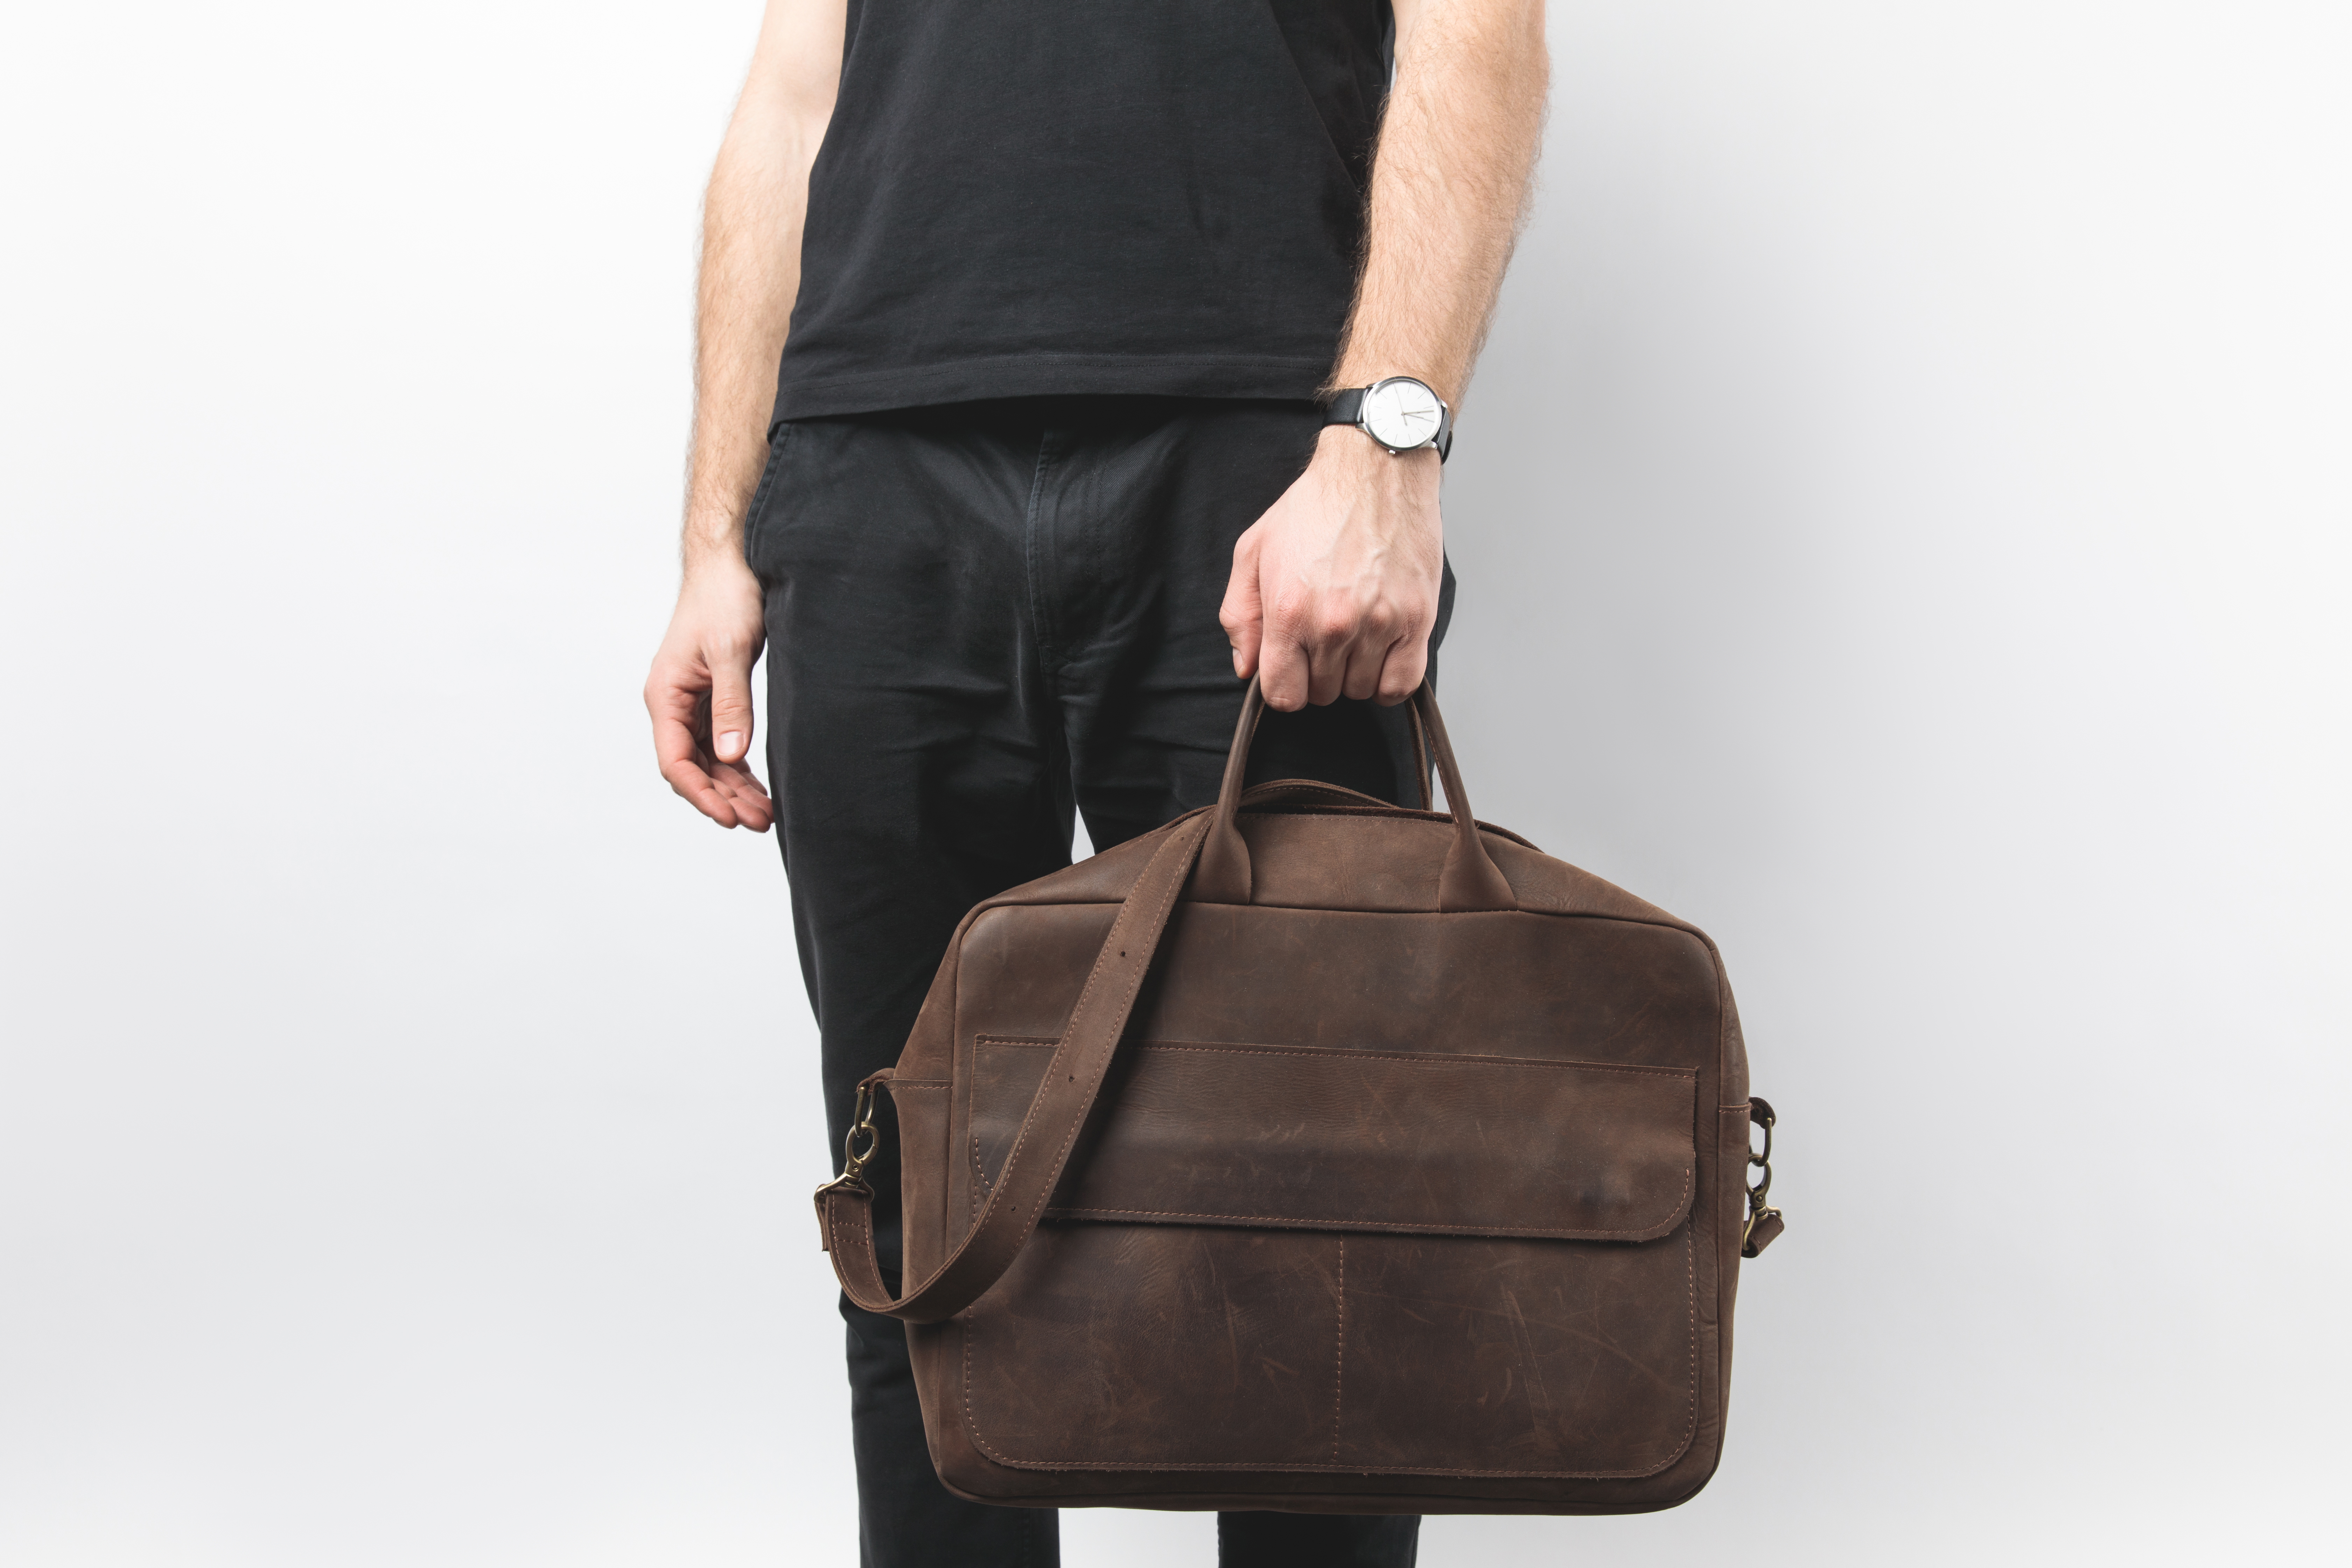 Partial view of man holding leather bag | Source: Shutterstock